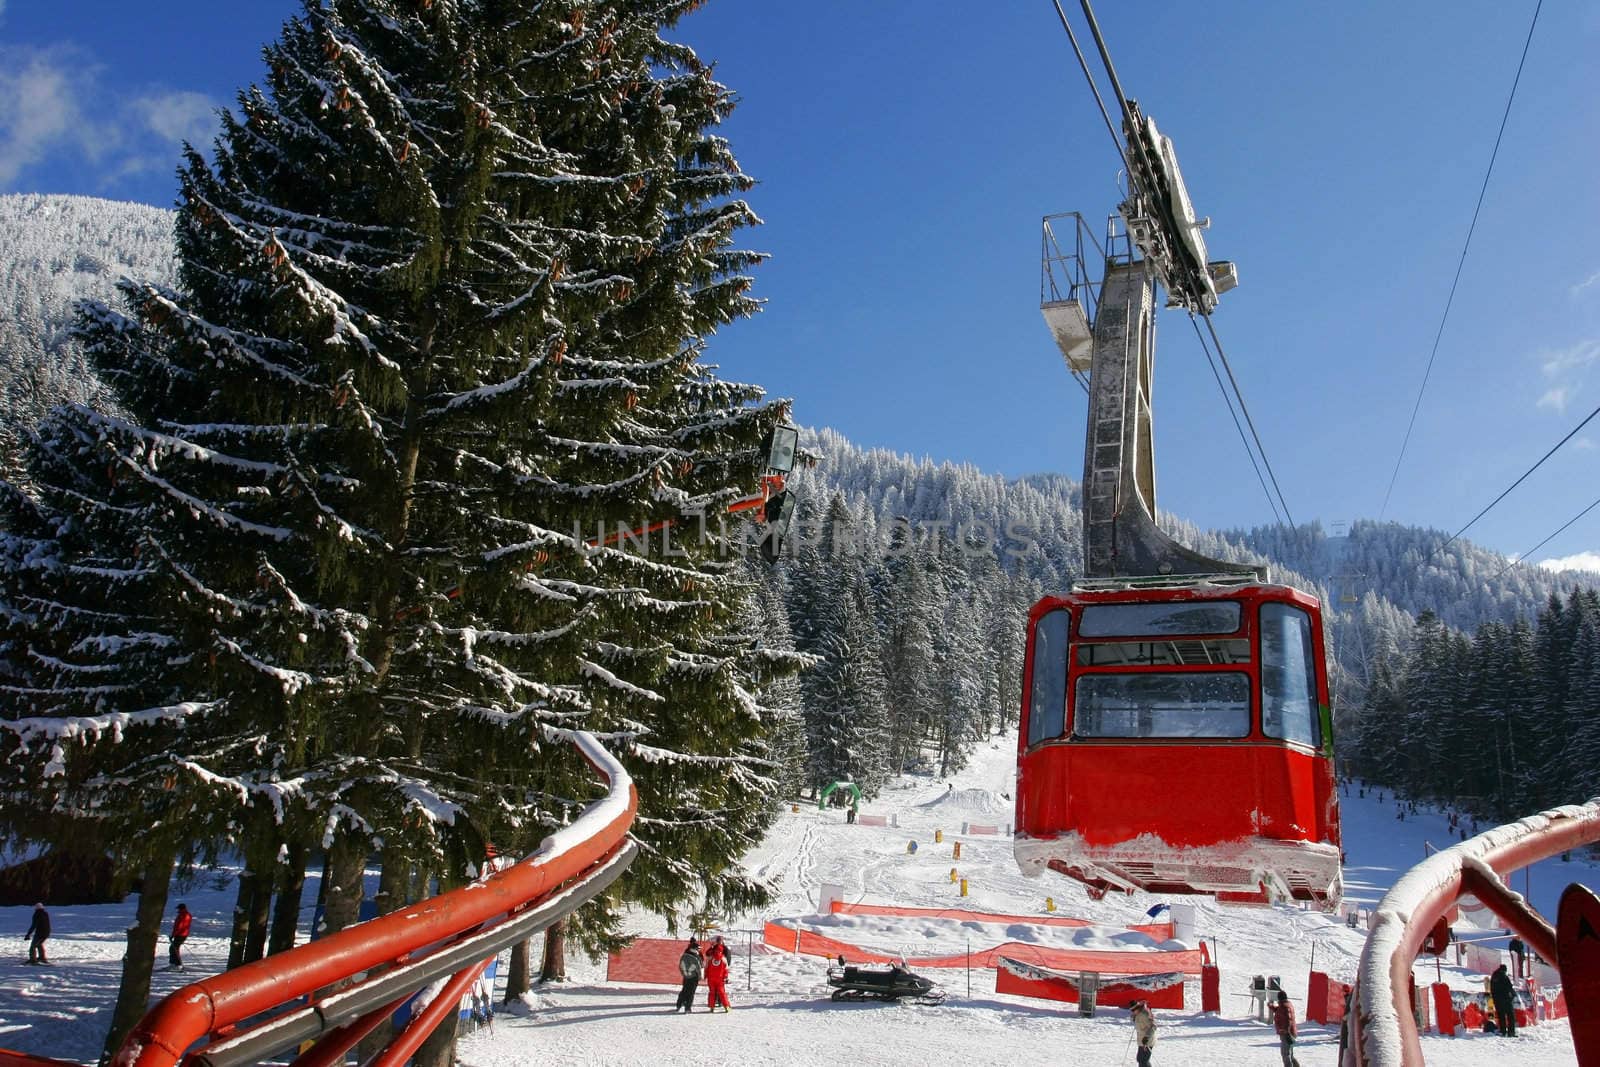 Winter landscape with a red cable car.